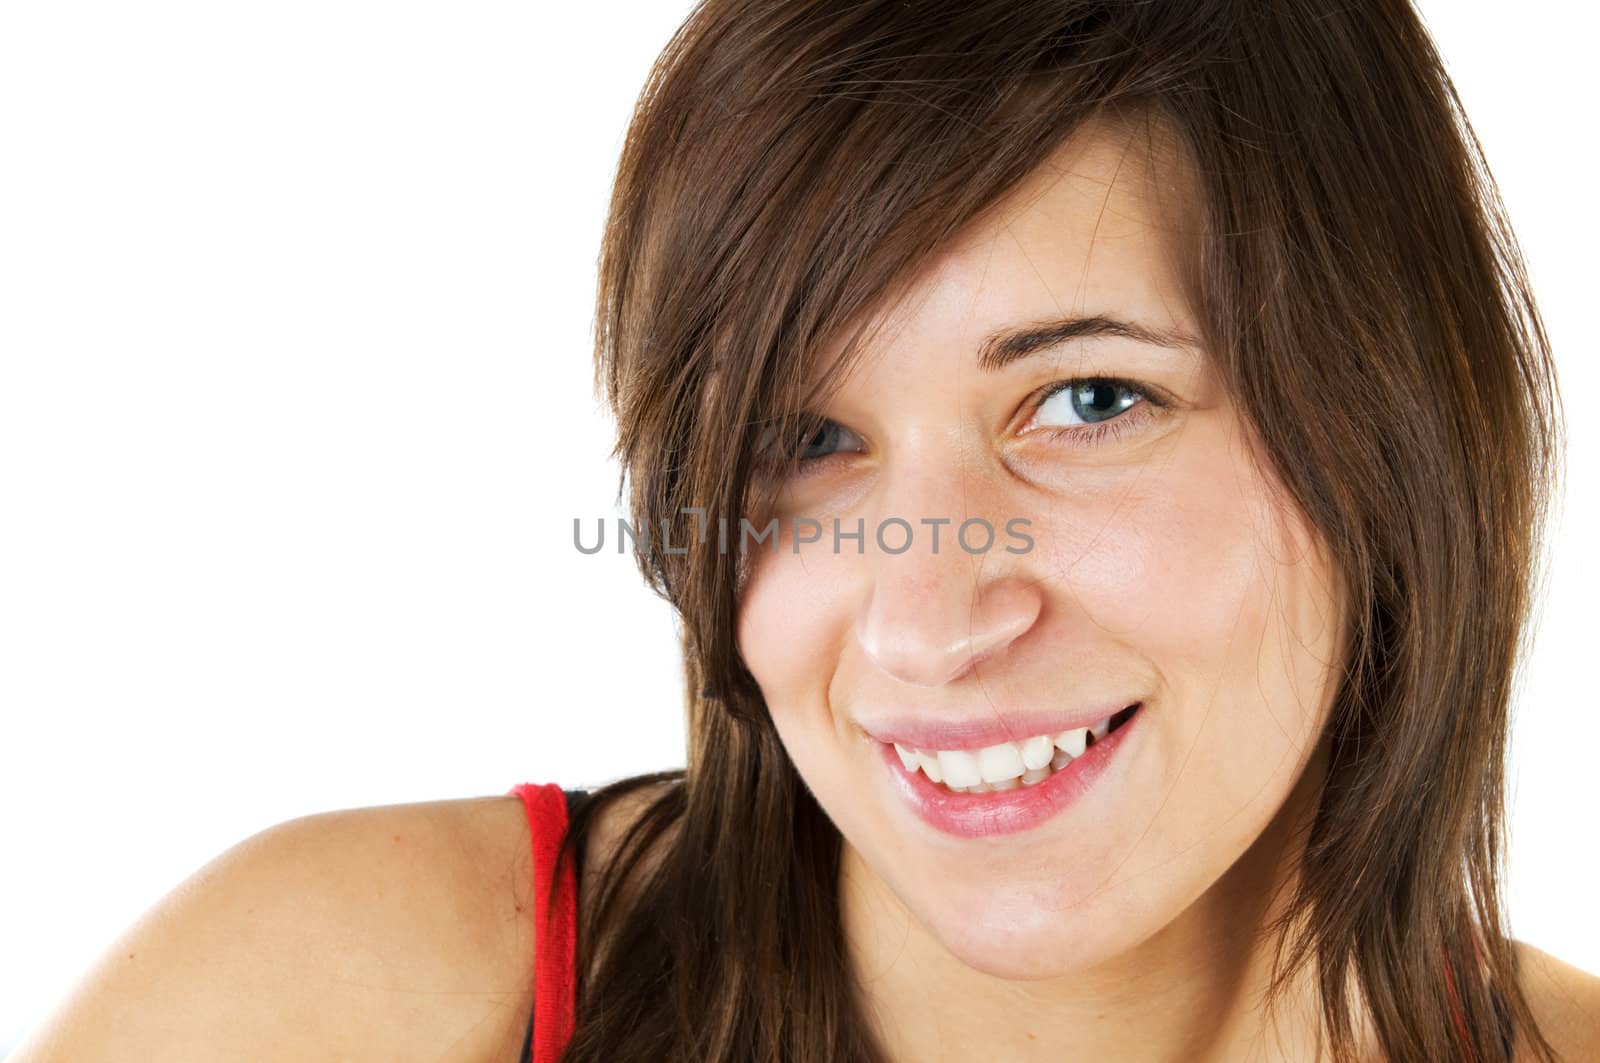 Portrait of young, smiling teenage girl